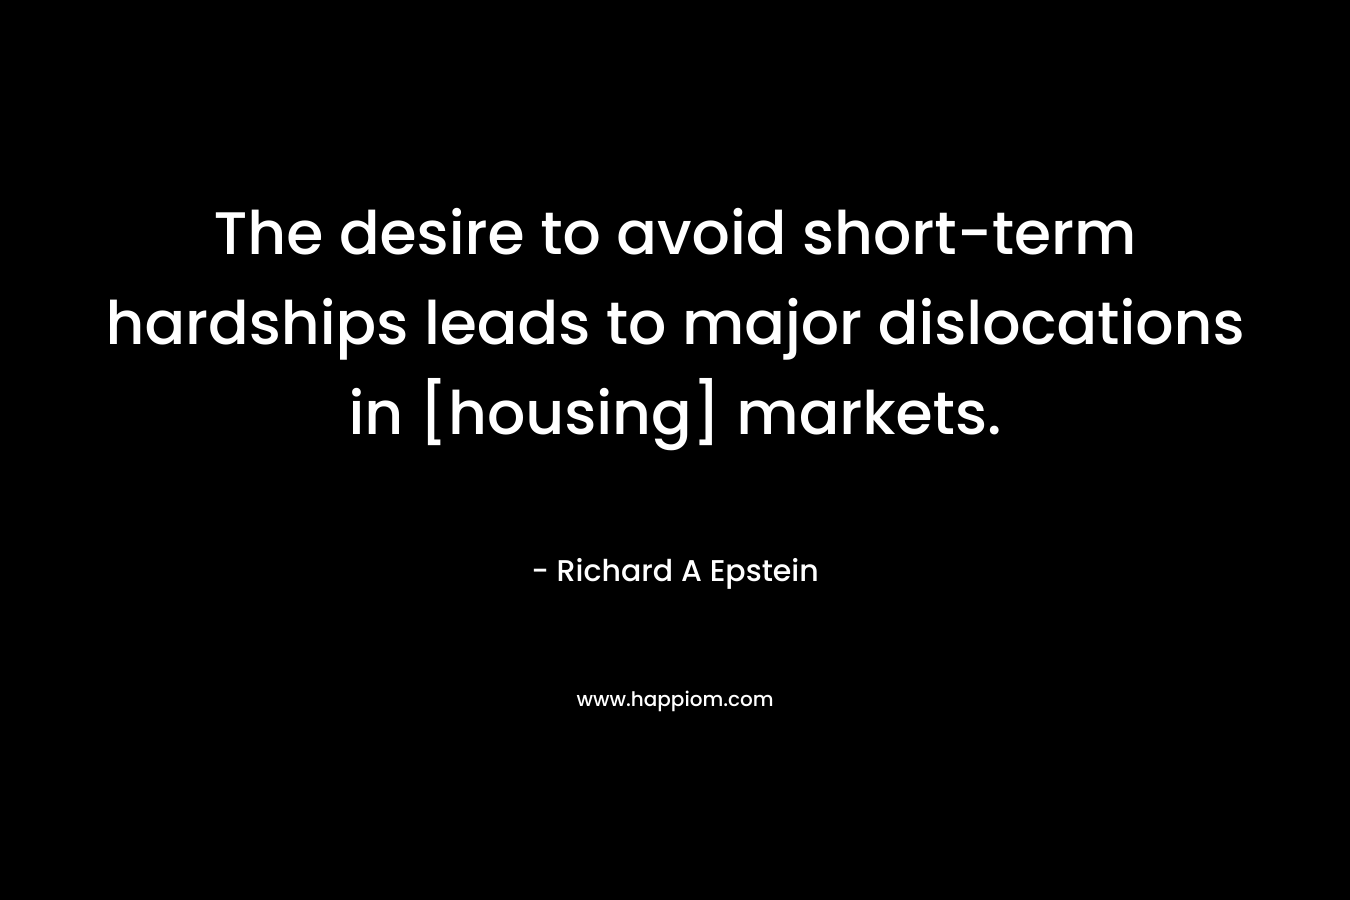 The desire to avoid short-term hardships leads to major dislocations in [housing] markets. – Richard A Epstein